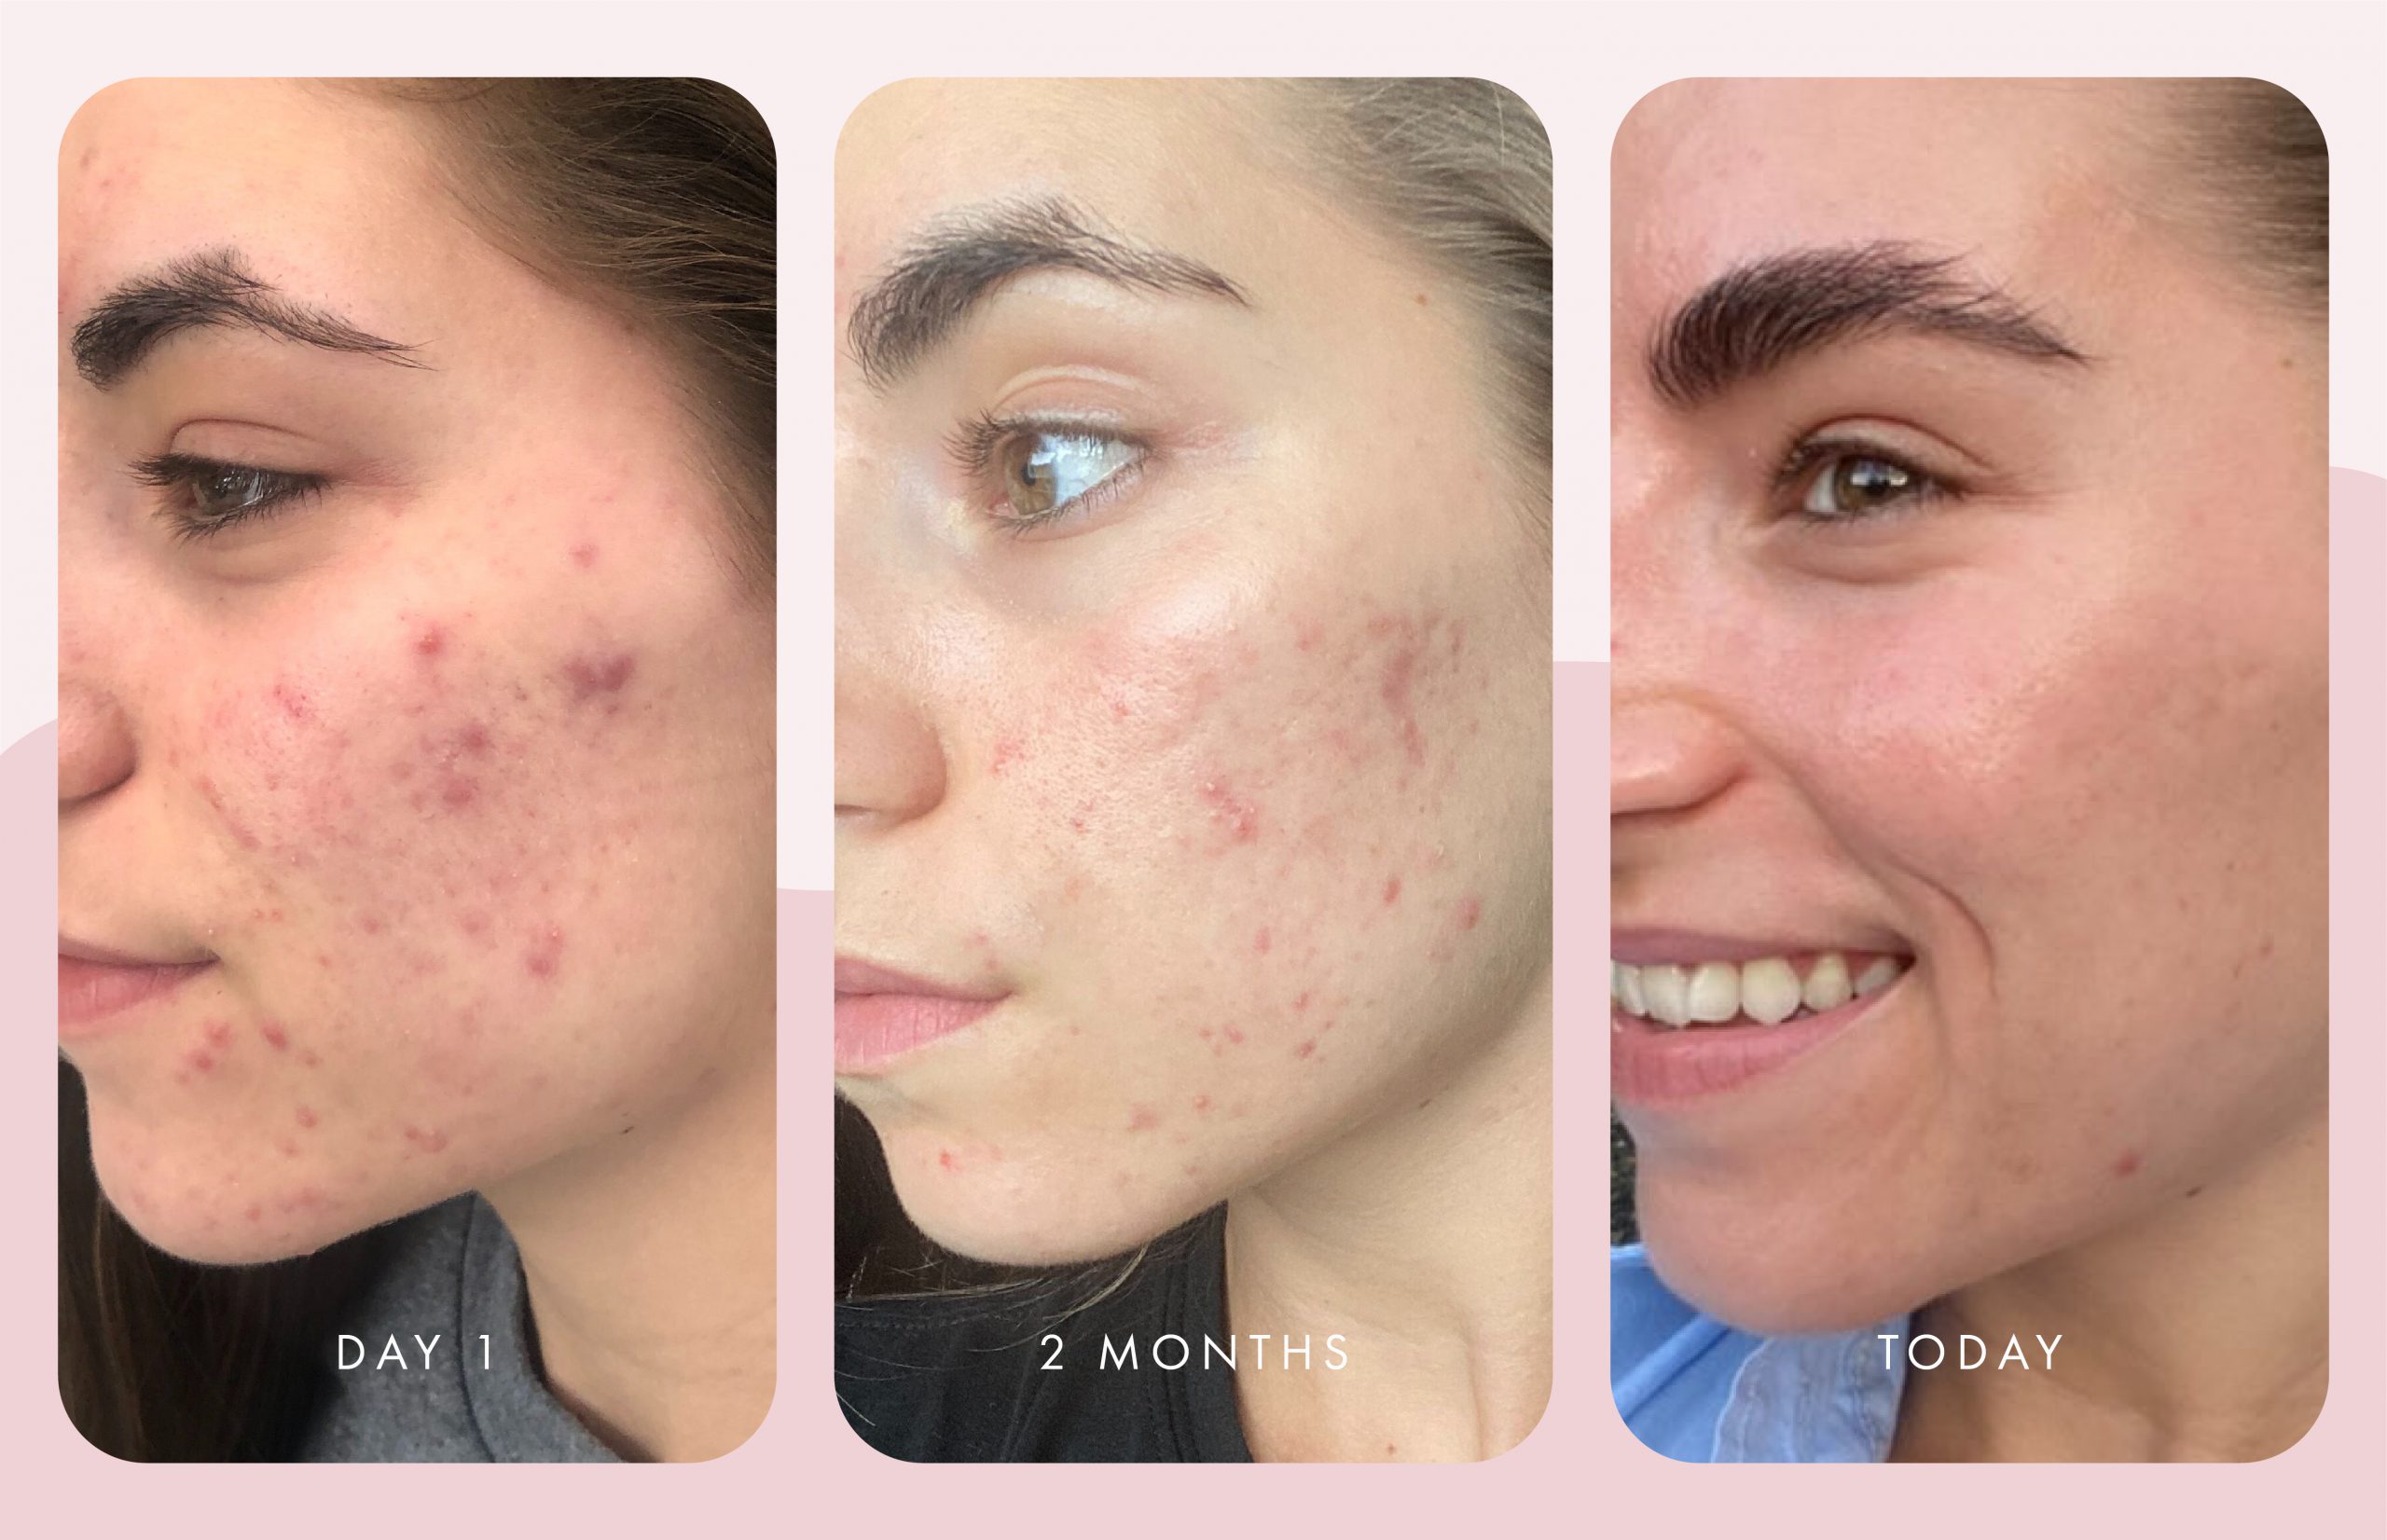 This Skincare Routine for Acne Can Give You Major Results